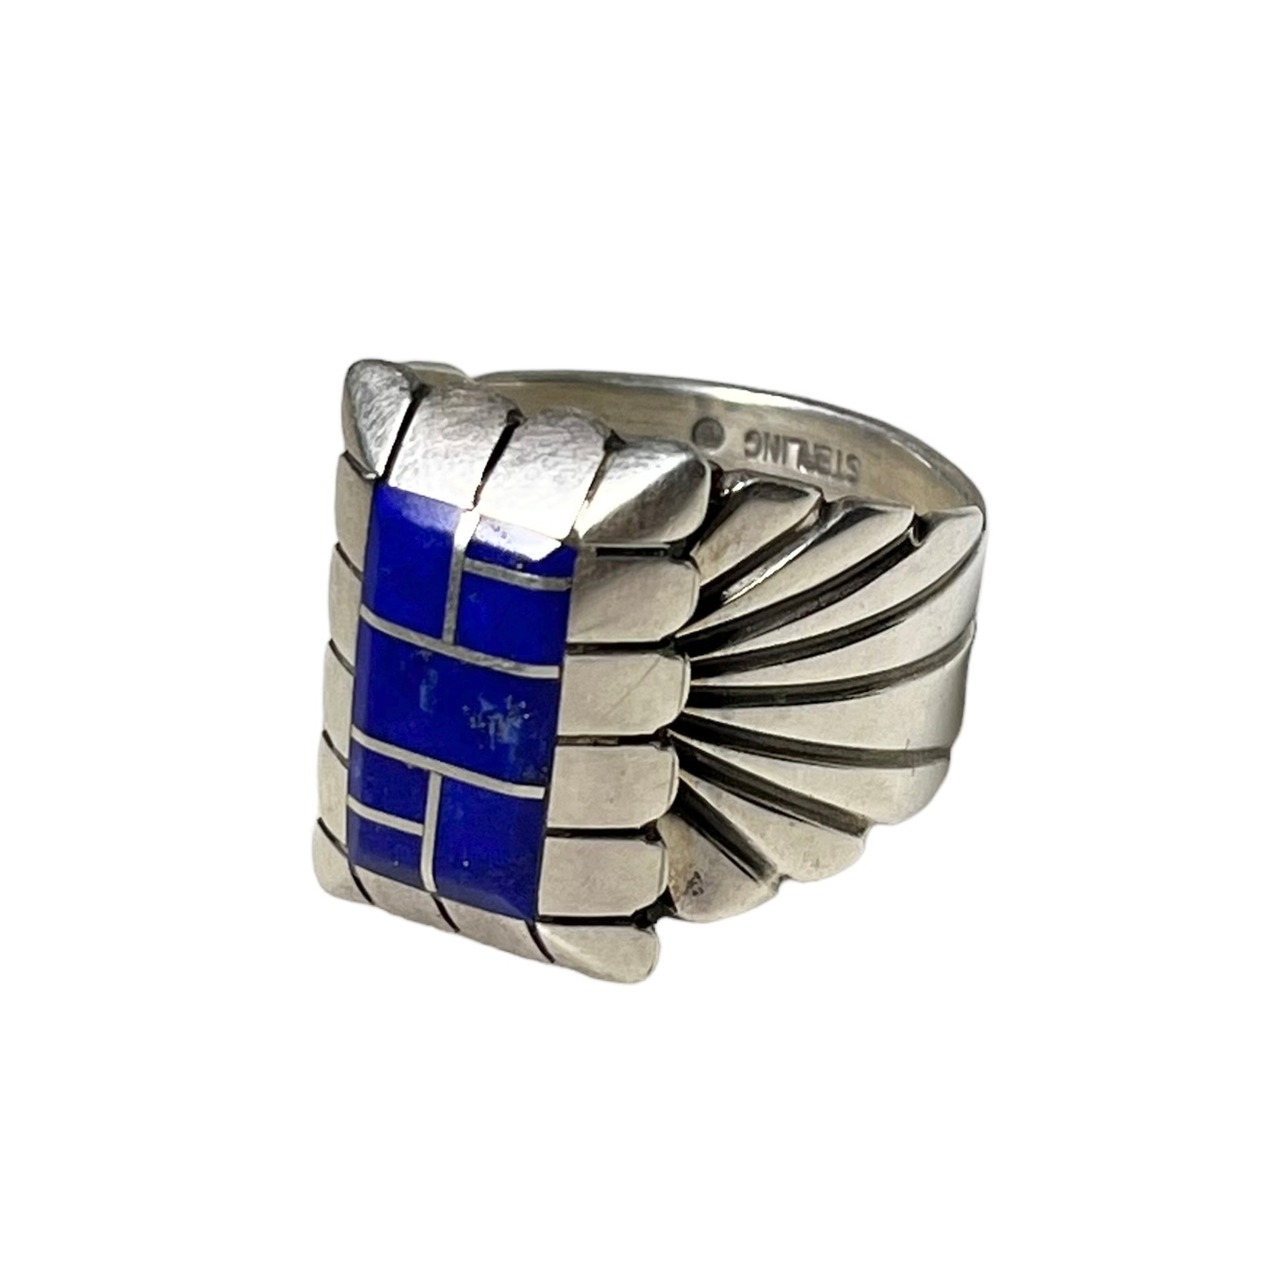 CHESTER BENALLY silver inlay ring set with lapis lazuli